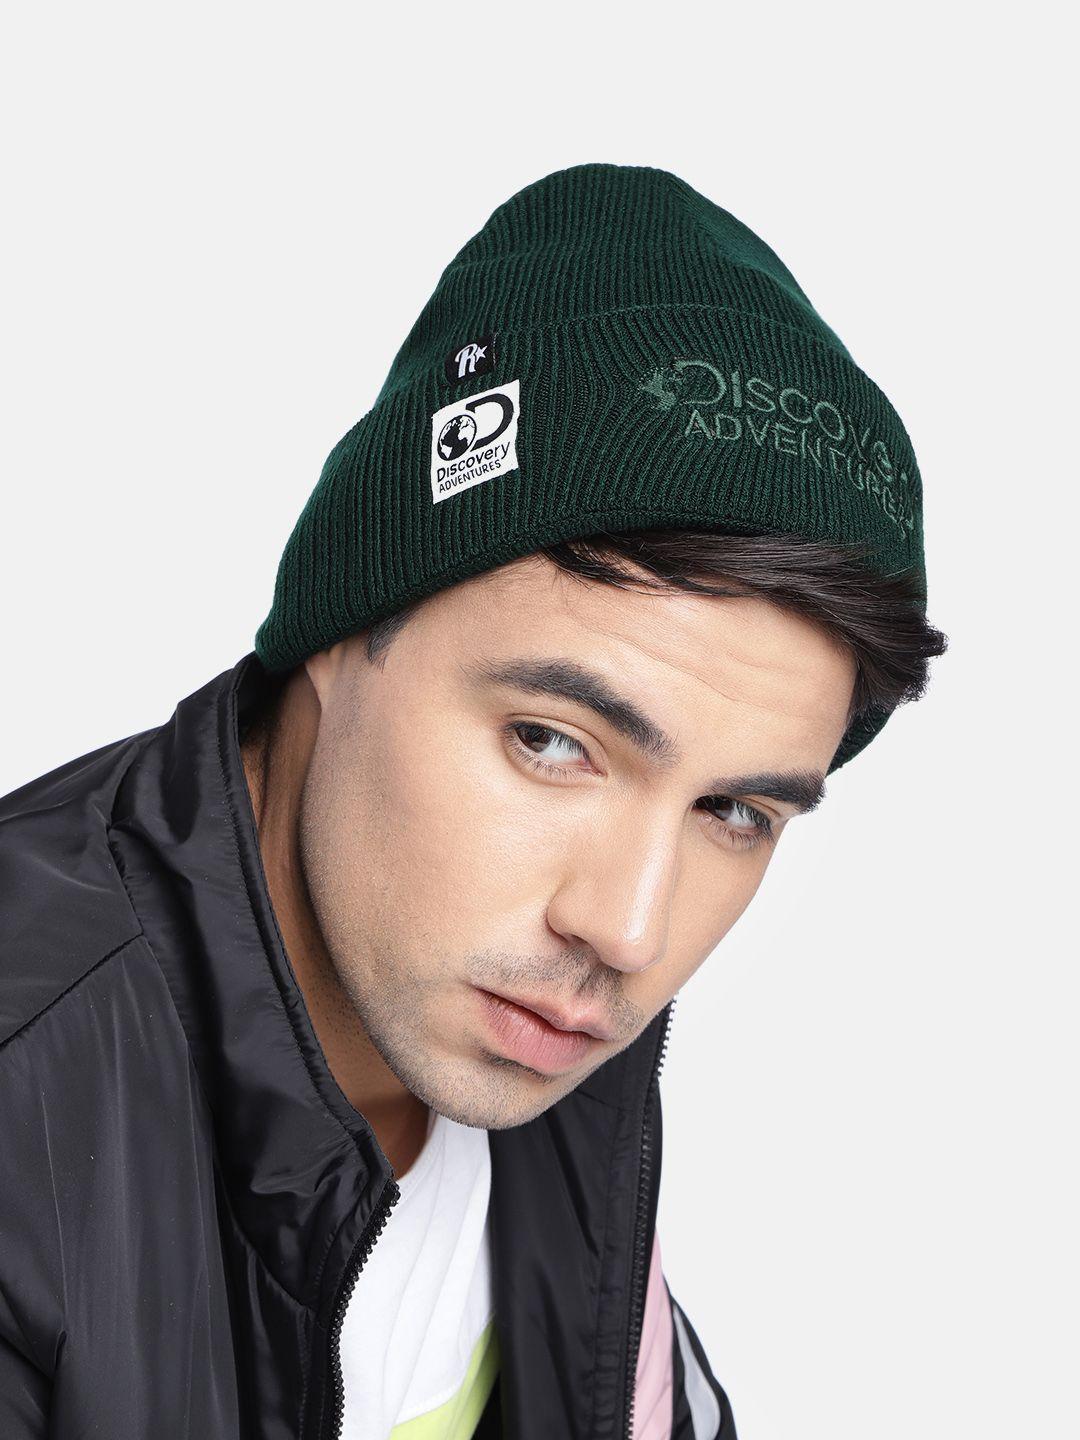 roadster x discovery adventures unisex b.green beanie